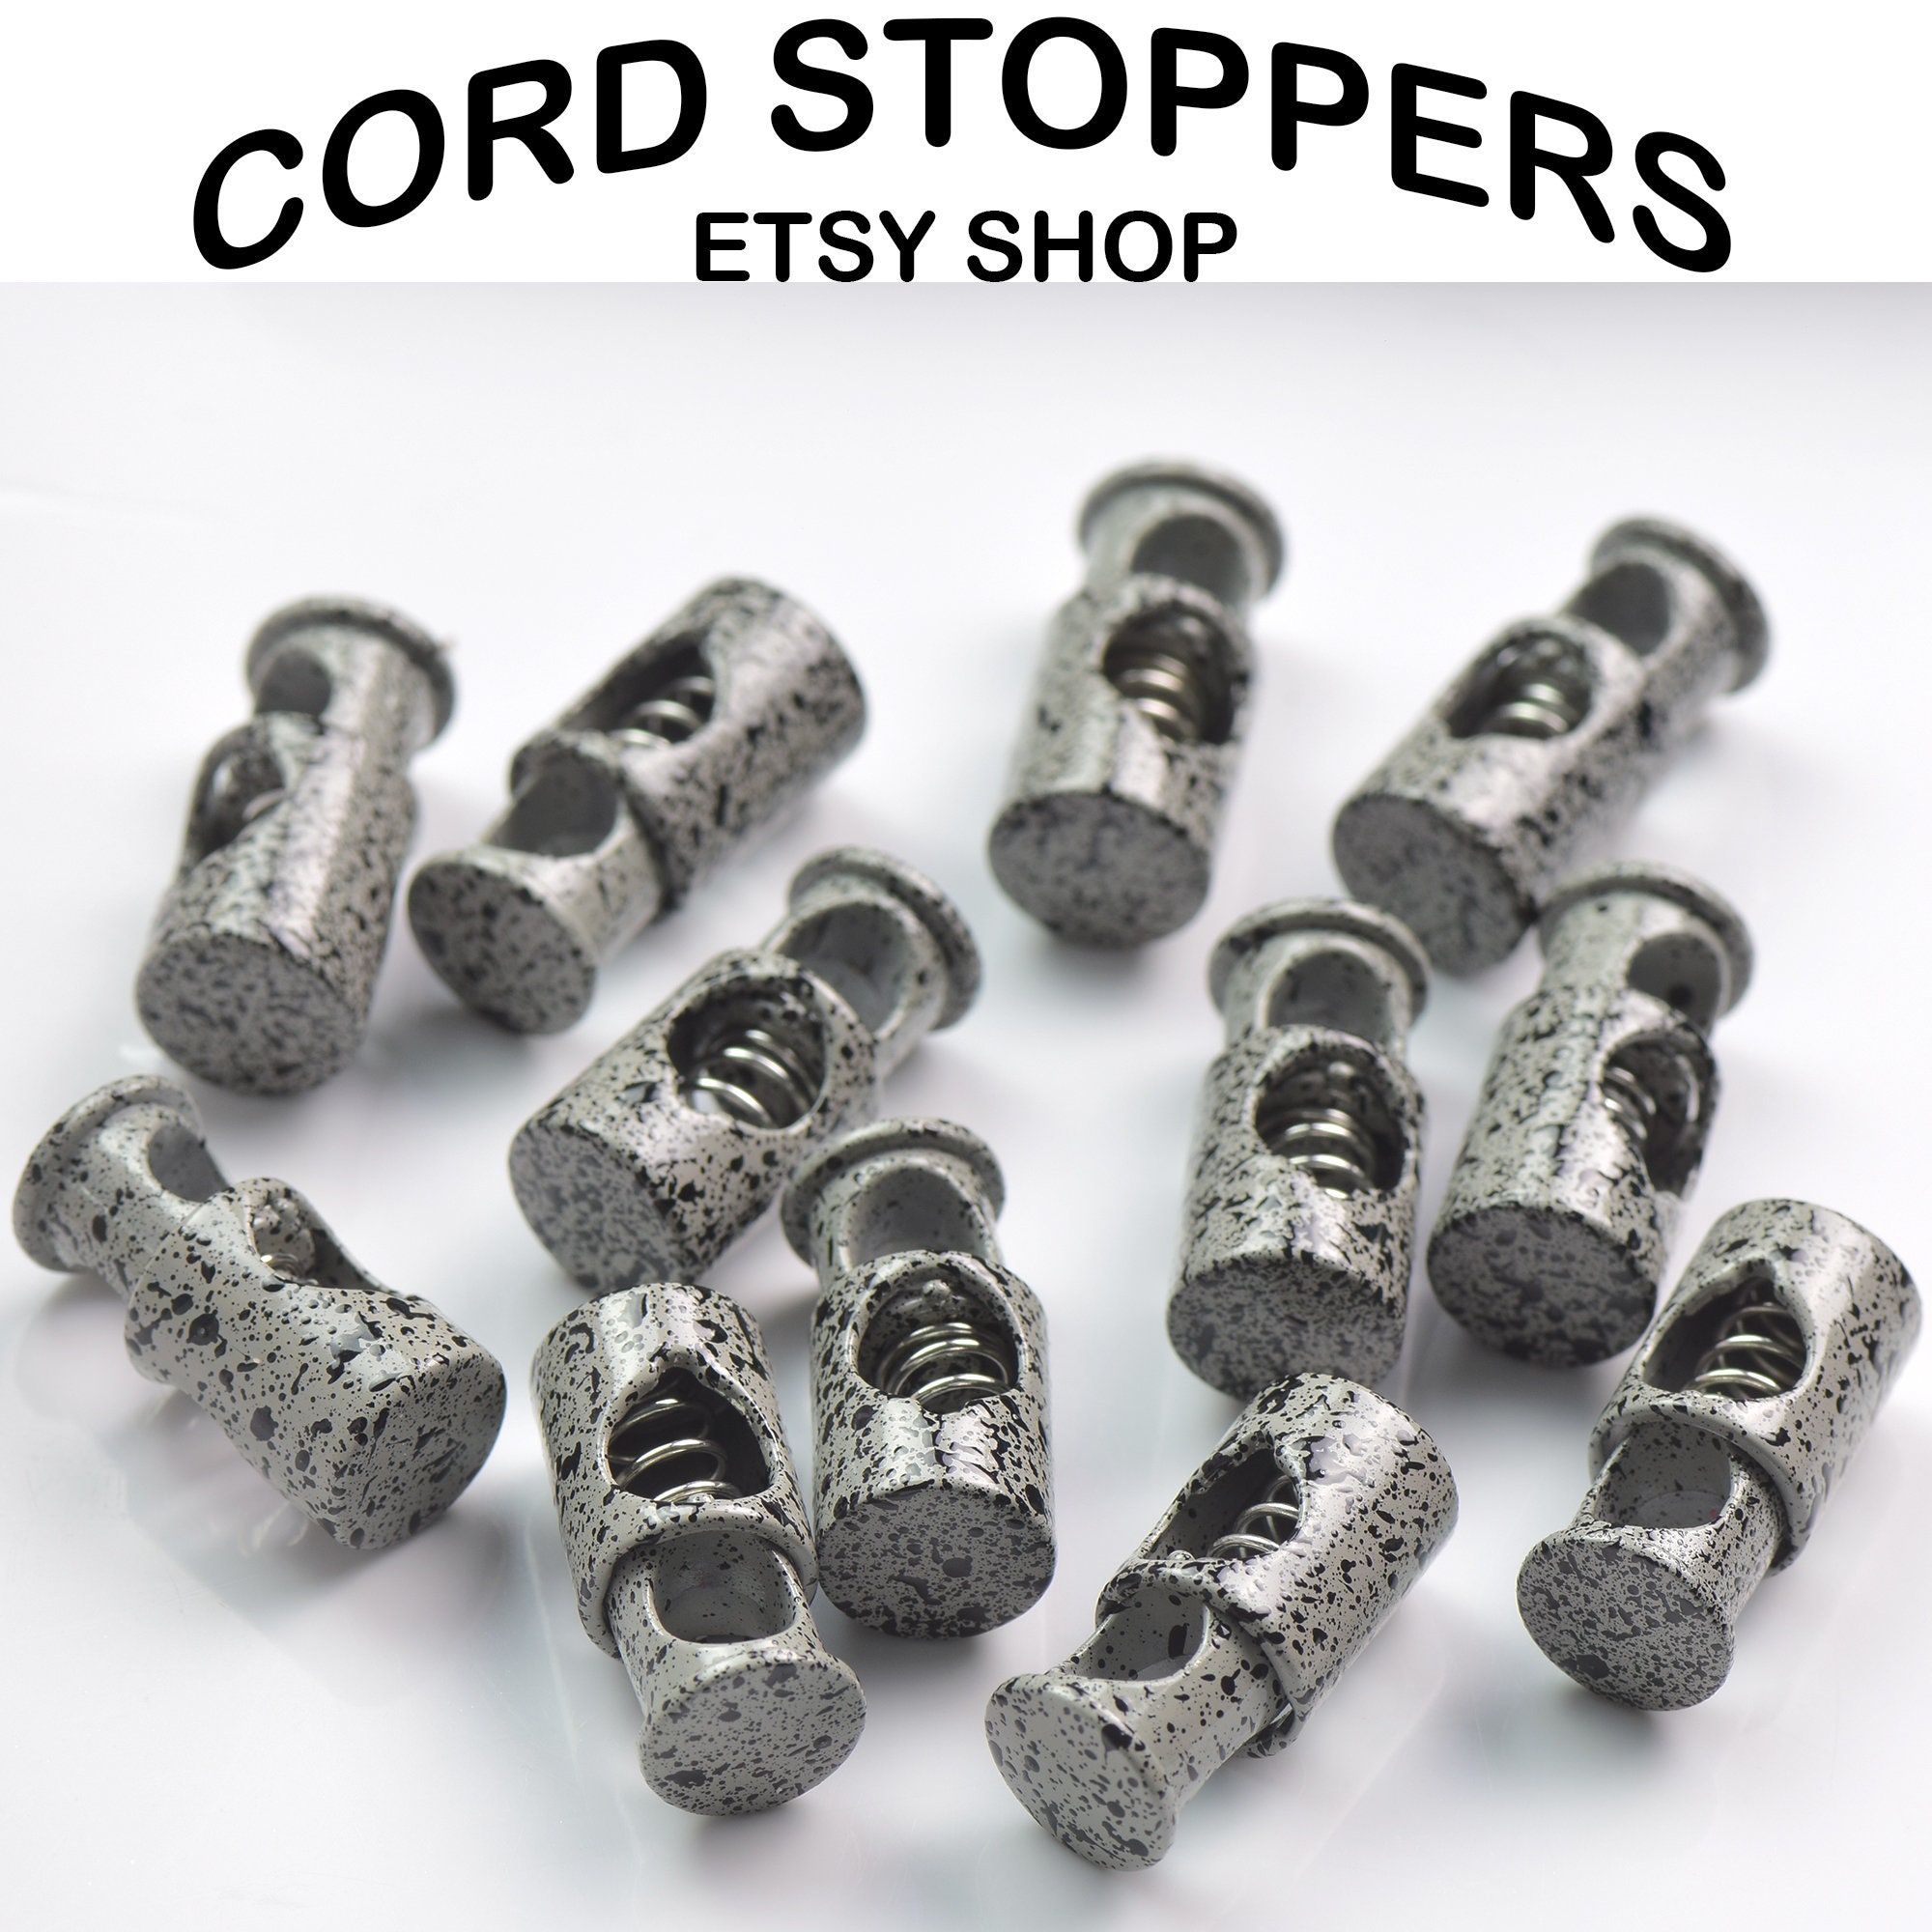 CEMENT SPECKLE Metal Classic Cord Stoppers Lace Locks for Shoelaces Laces  Strings & Cords Alike Ships From the USA 